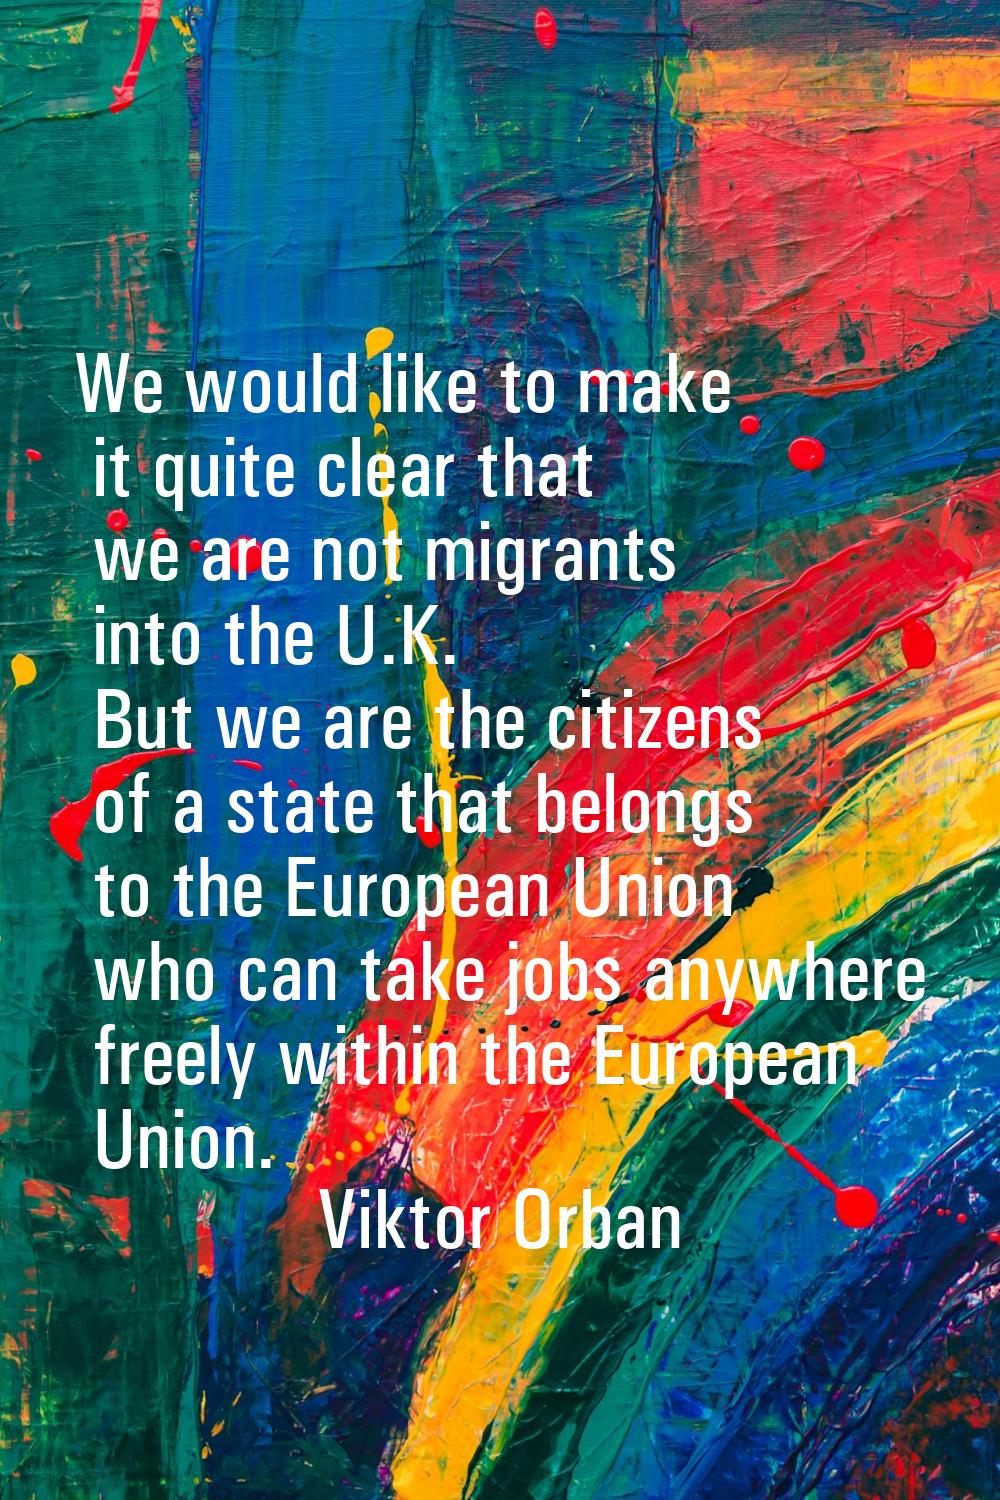 We would like to make it quite clear that we are not migrants into the U.K. But we are the citizens